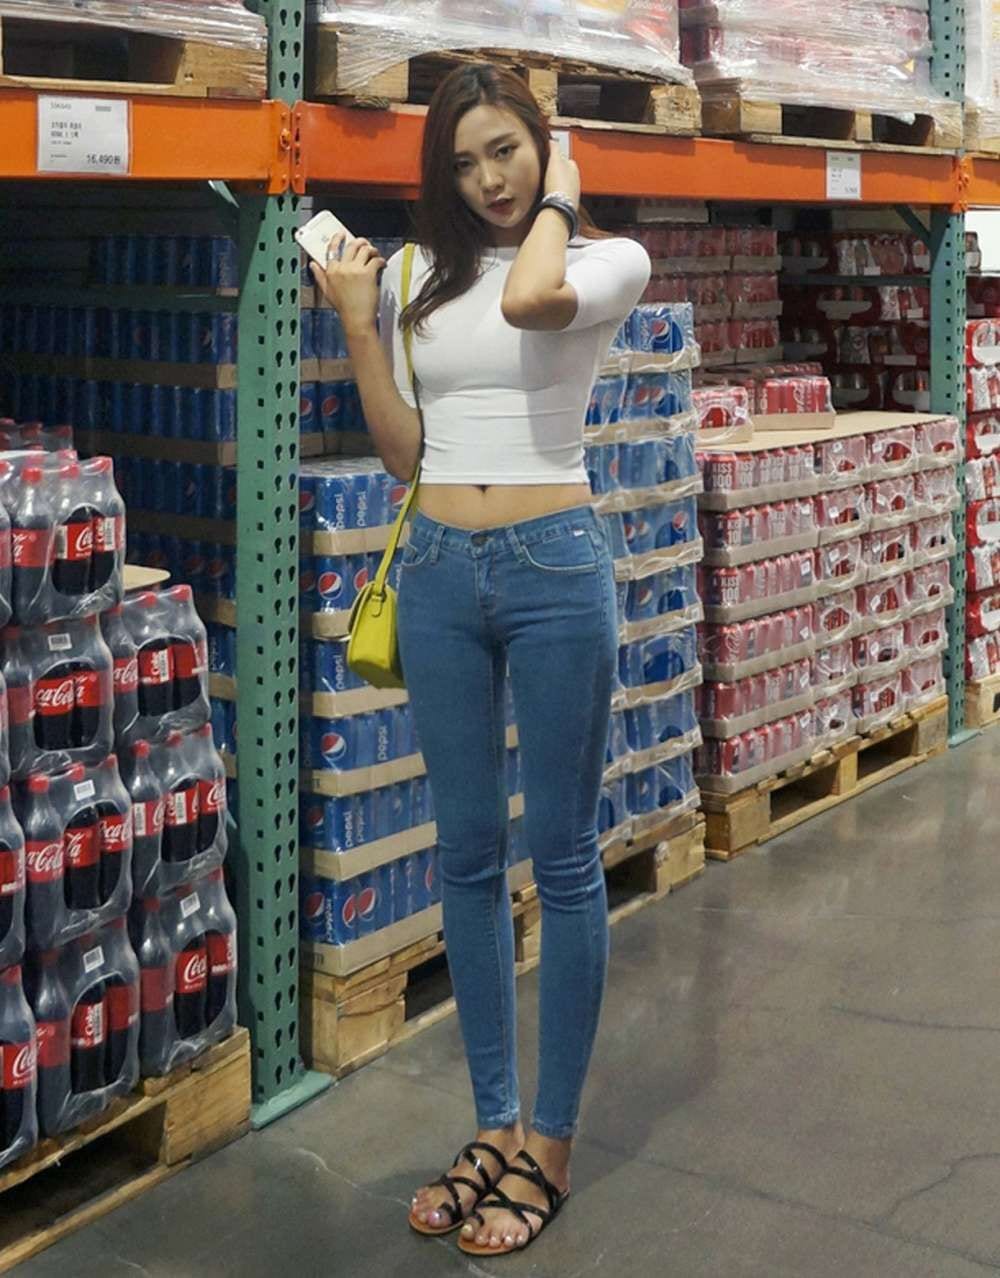 costco fails that take shopping to a whole new level - Po22 pepsi els